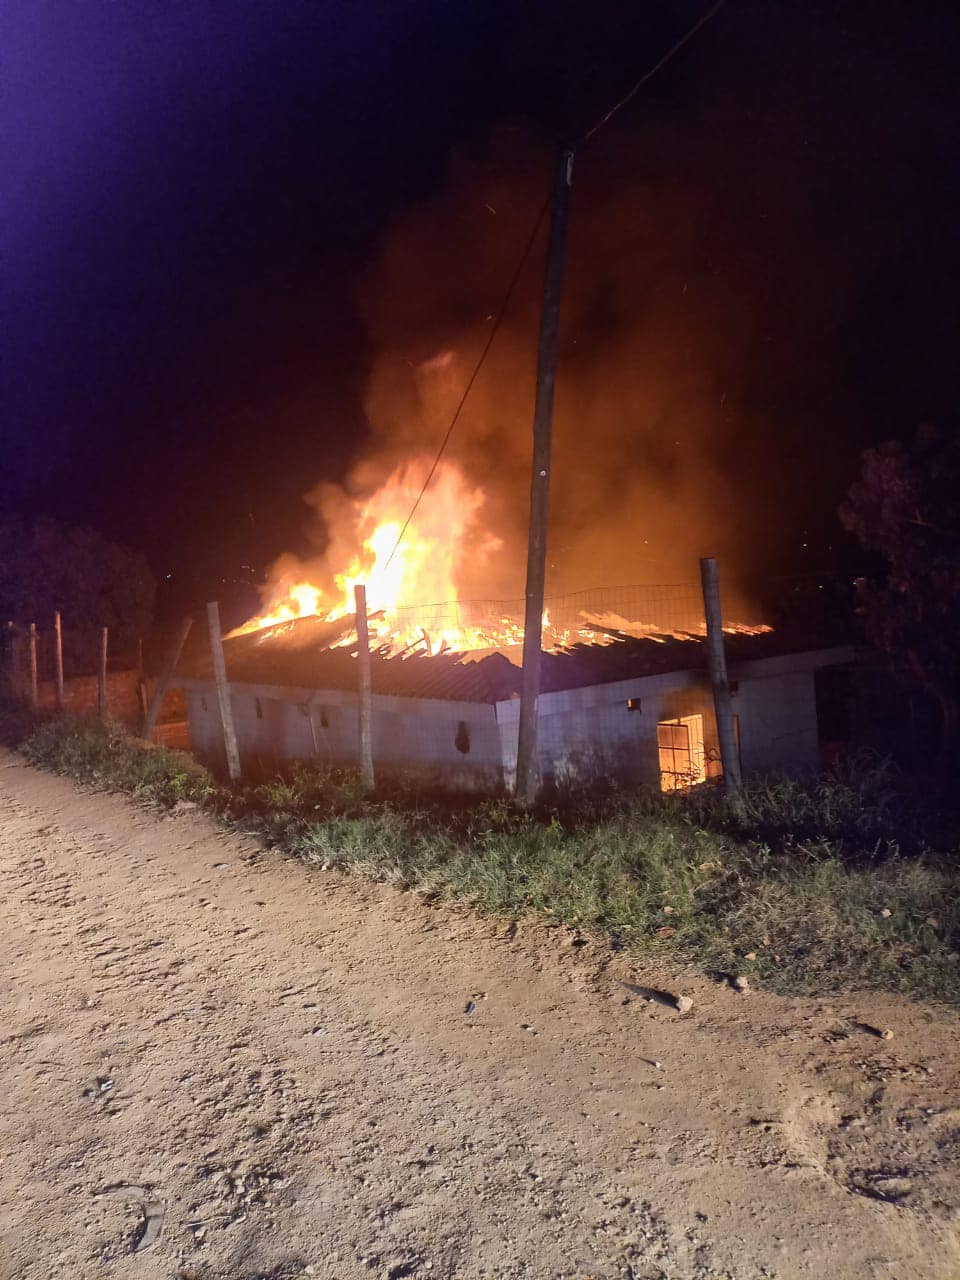 House on fire in Osindisweni